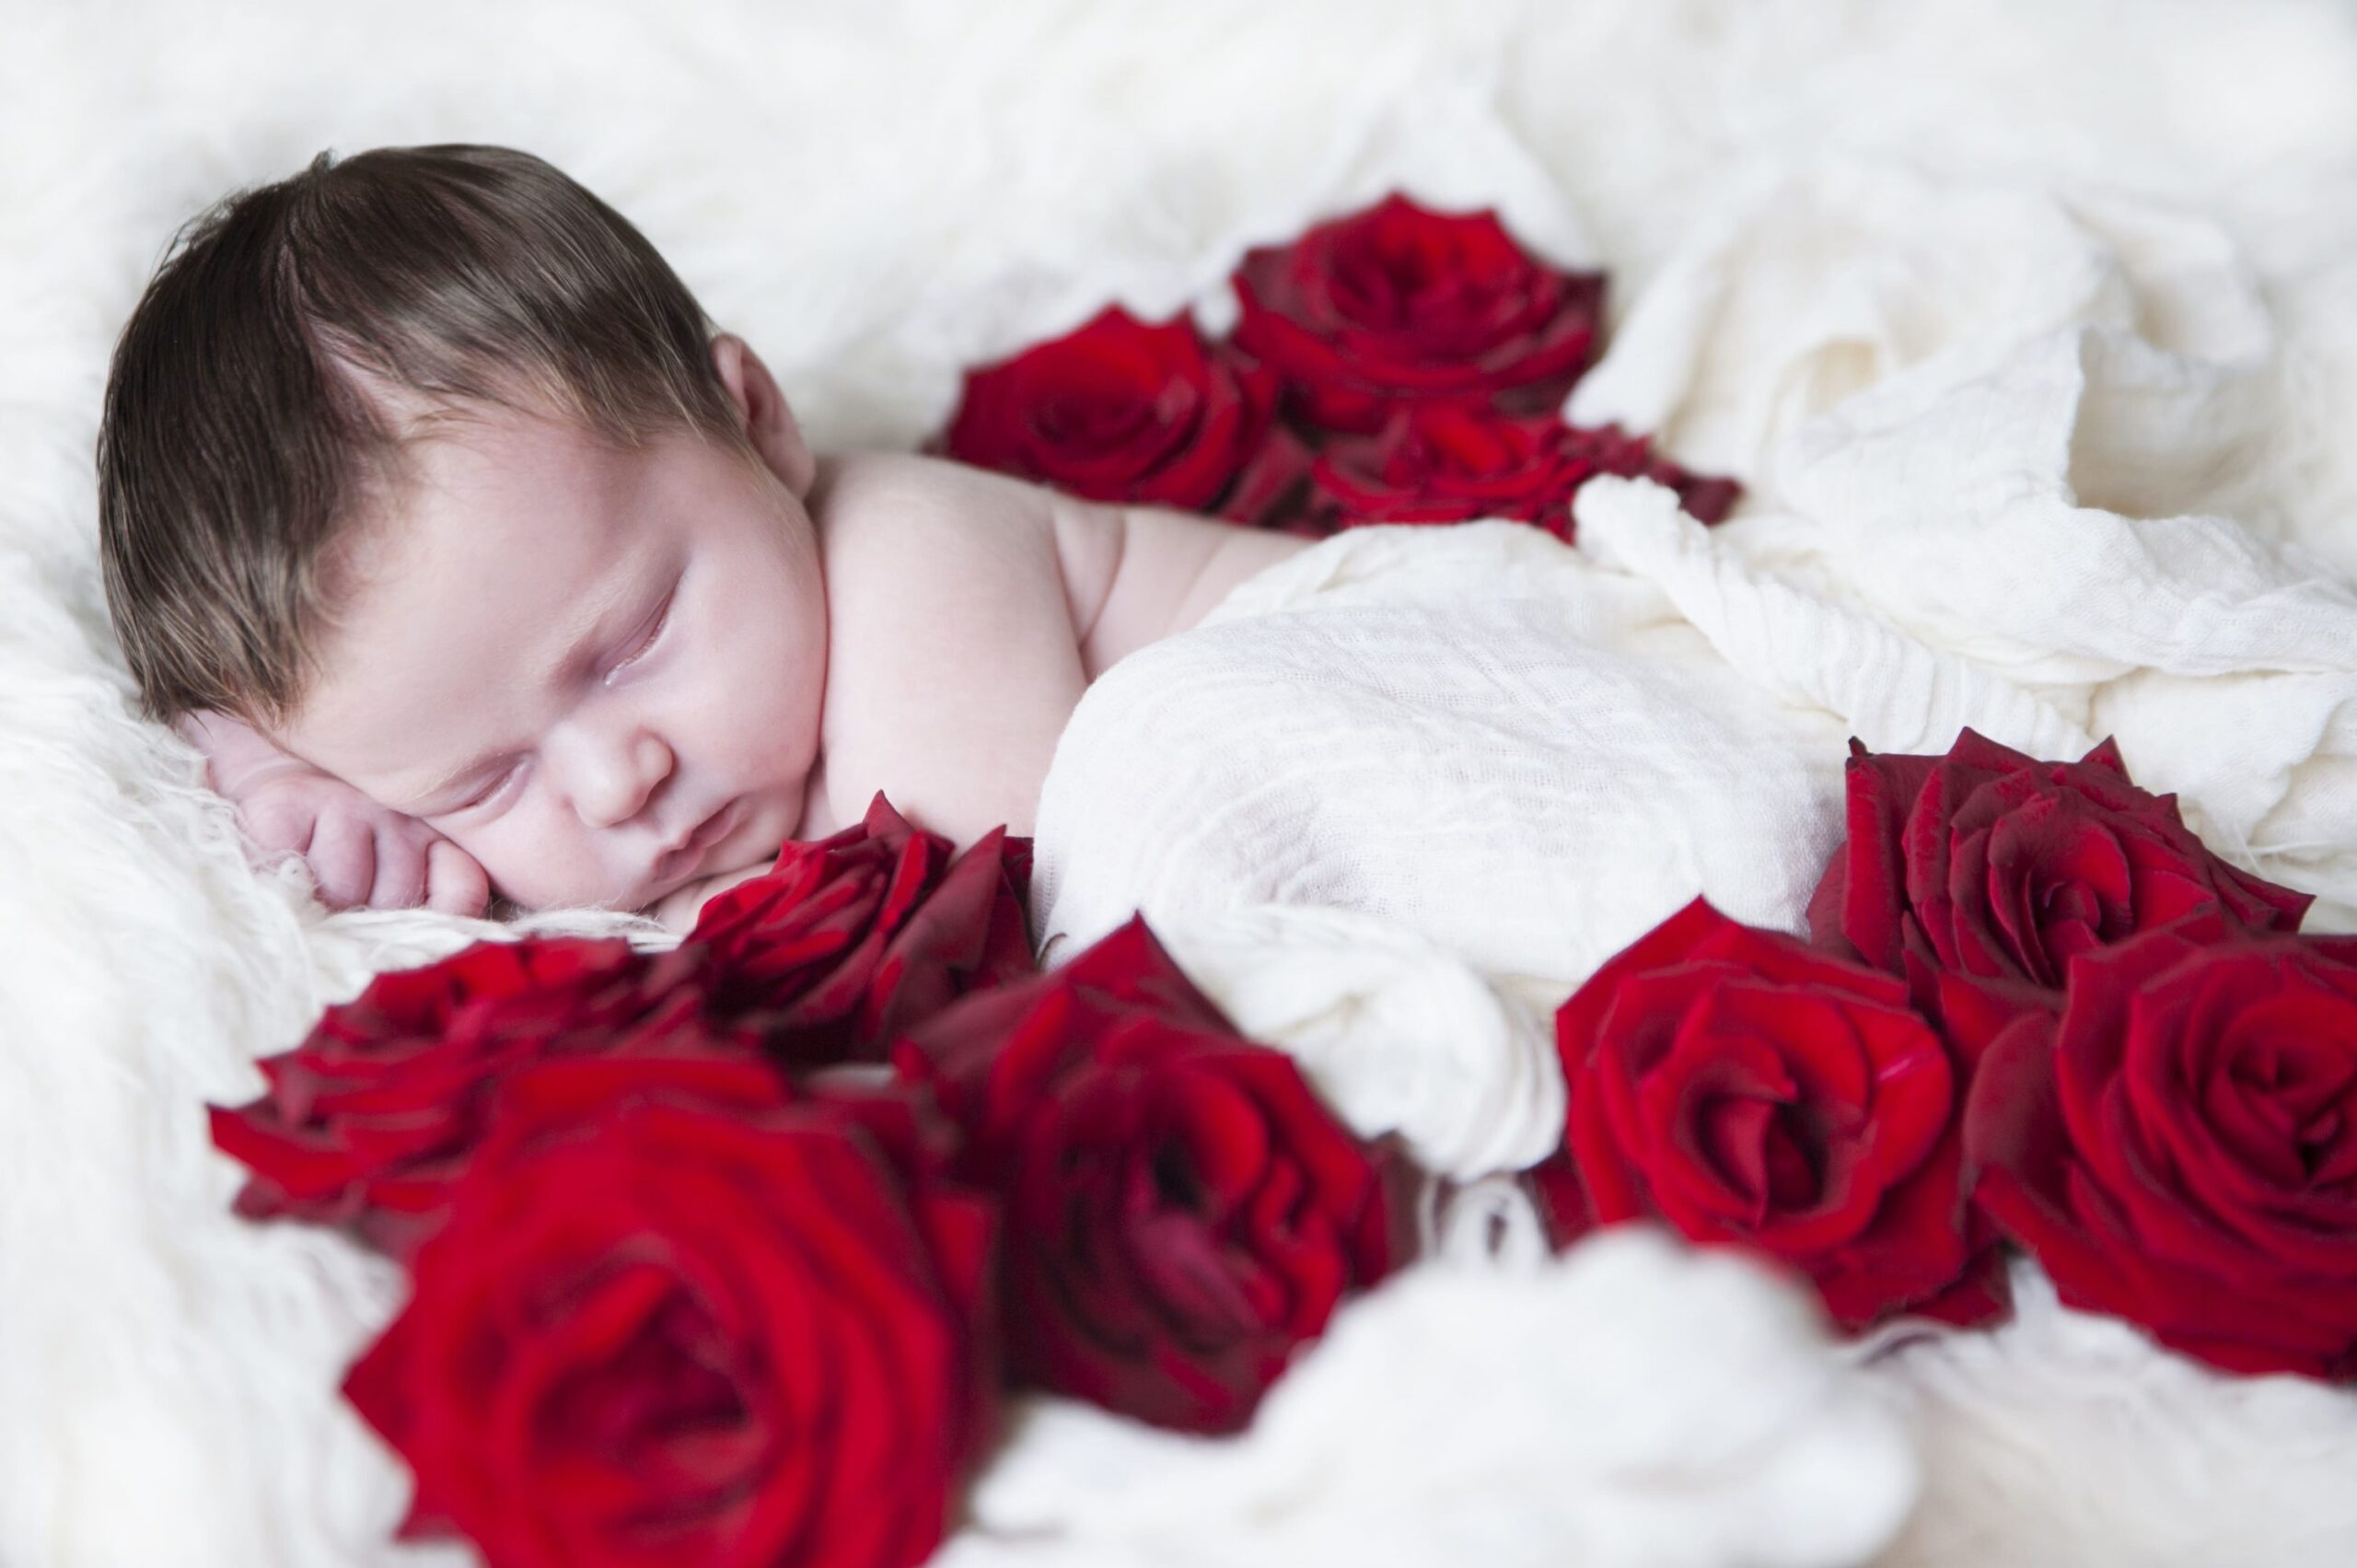 Newborn sleeping with roses besides, photograph captured by Dena Shearer